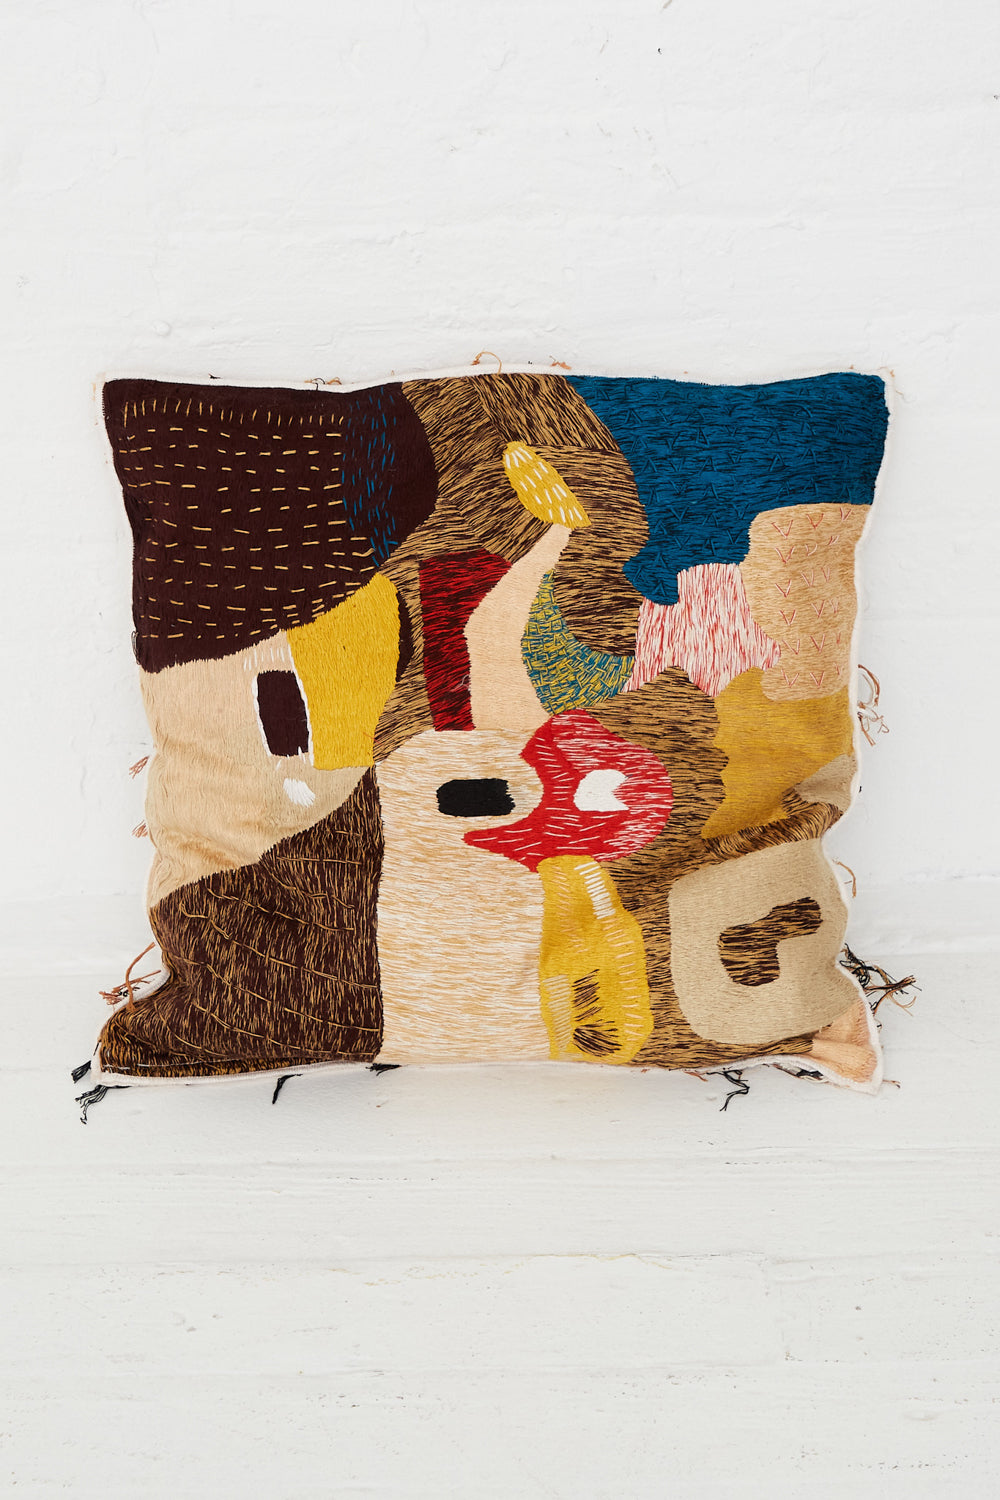 A Complex Embroidery Cave Cushion with a colorful pattern and hand embroidery by Luna Del Pinal.